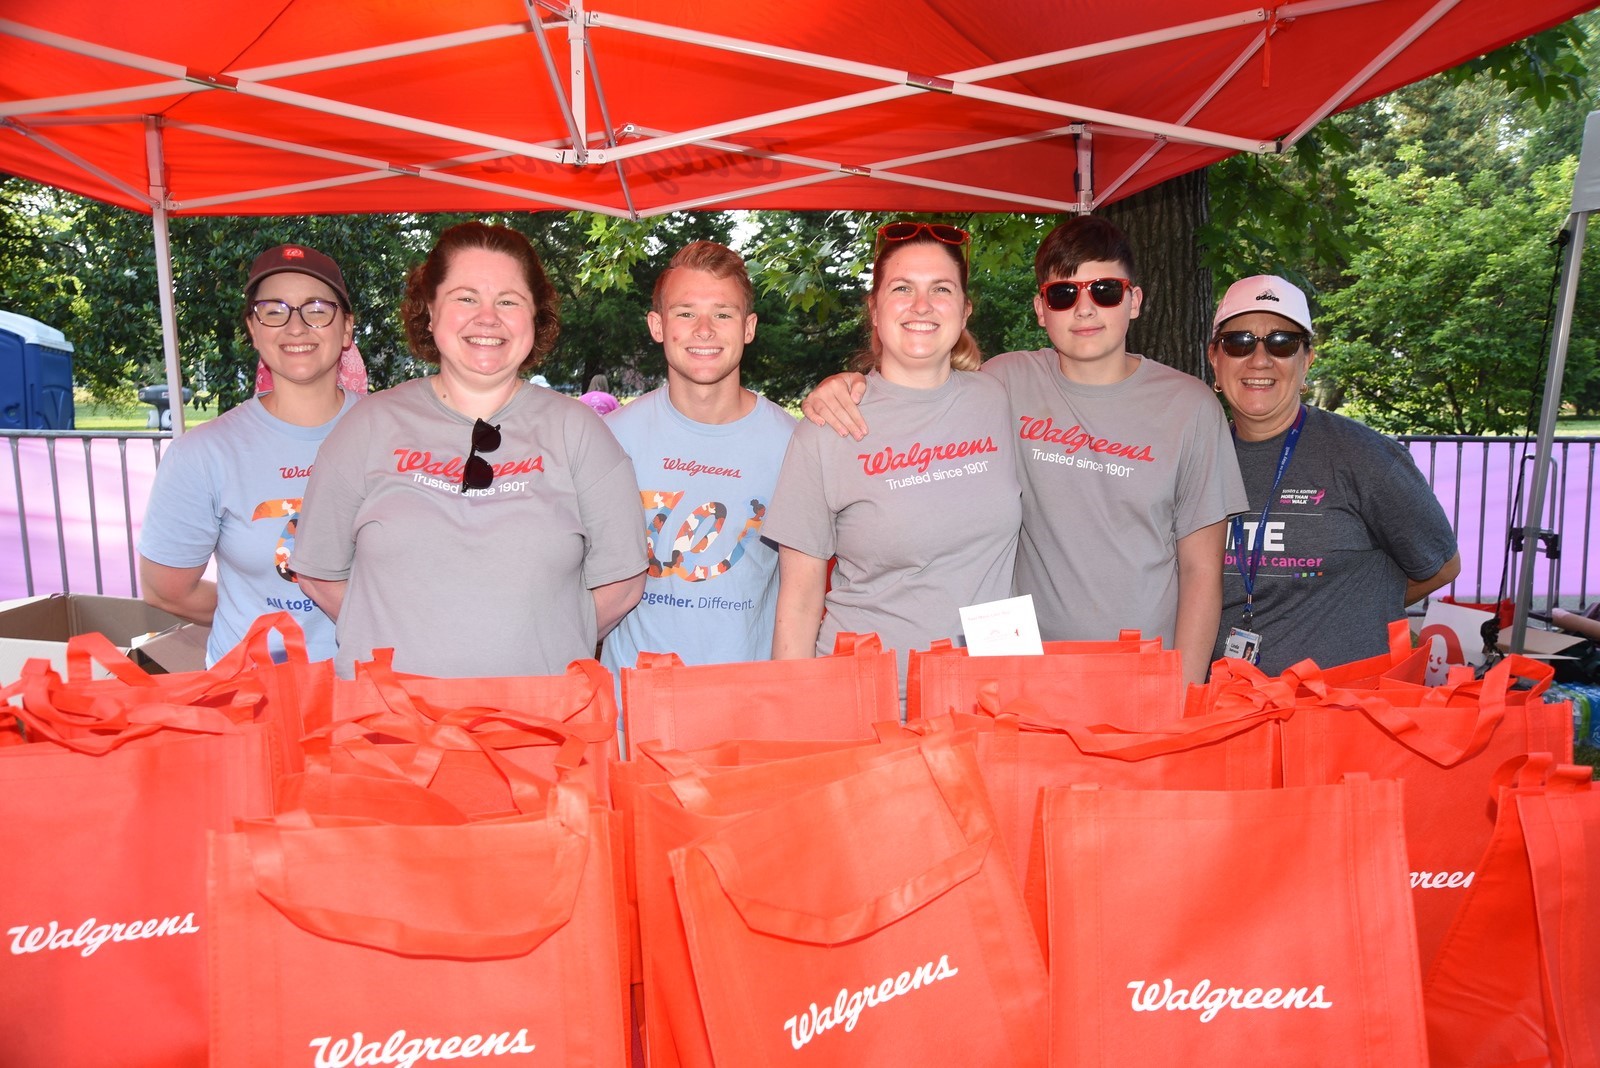 Walgreen's team members at a Komen event posing in front of numerous Walgreens shopping tote bags